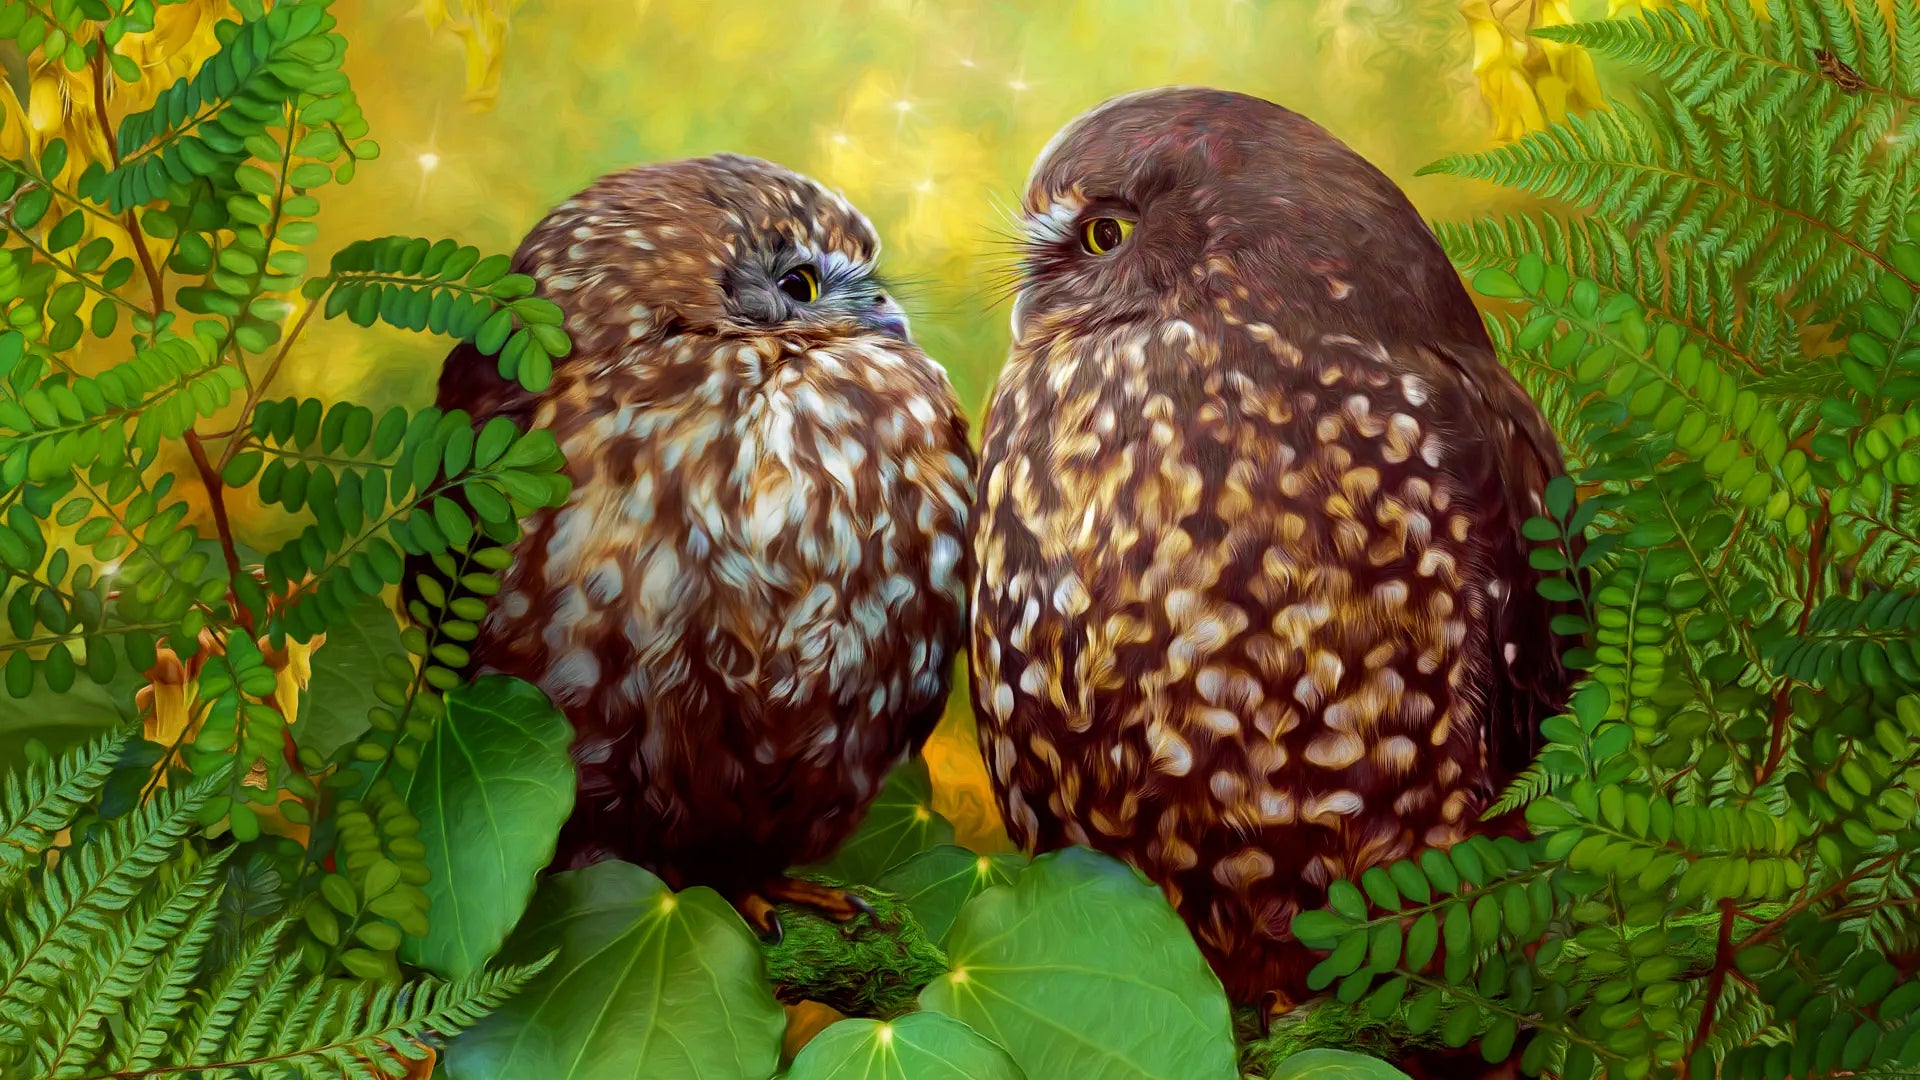 An artwork of two ruru morepork owls perched amongst native foliage staring lovingly at each other, with a backdrop of kowhai blossoms